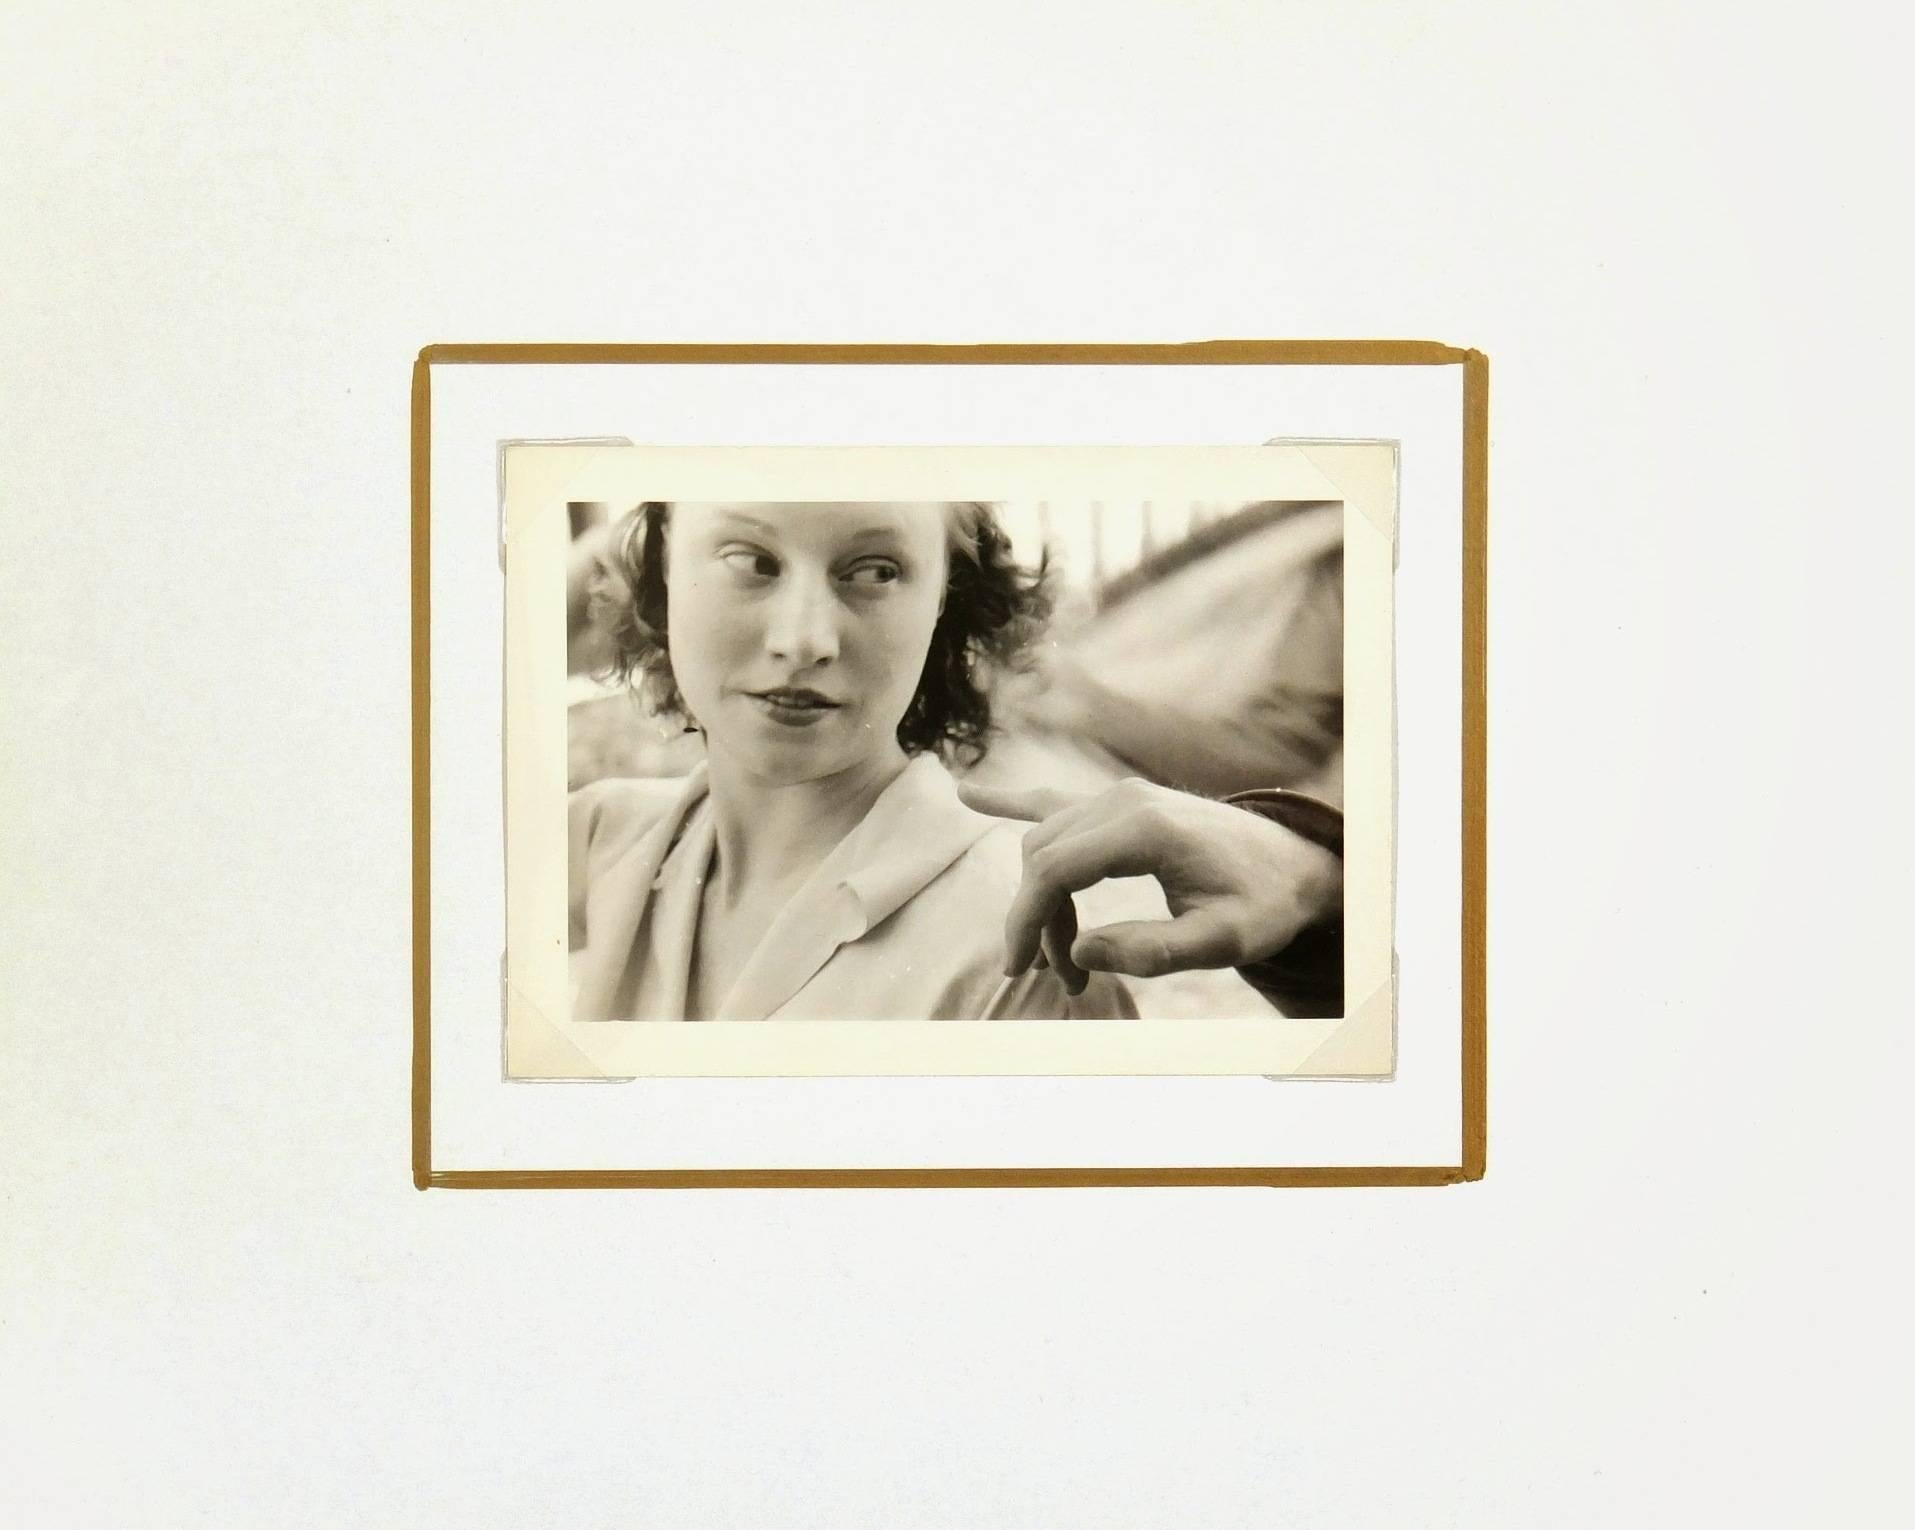 Vernacular black and white photograph of woman. France, circa 1940.

Original artwork on paper displayed on a white mat with a gold border. Mat fits a standard-size frame.  Archival plastic sleeve and Certificate of Authenticity included. Artwork,